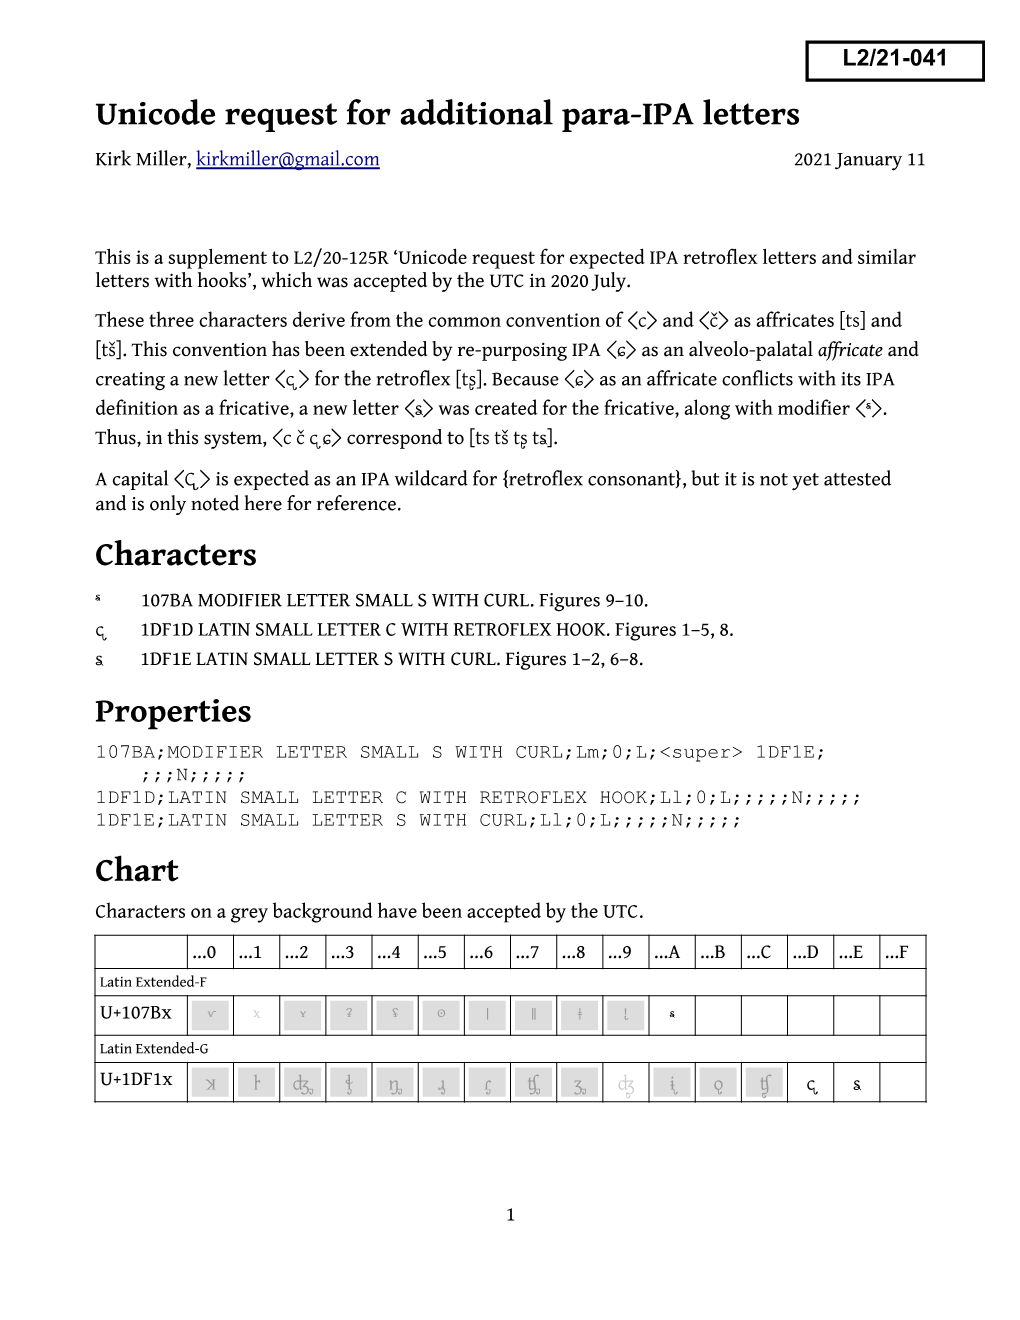 Unicode Request for Additional Para-IPA Letters Characters Properties Chart